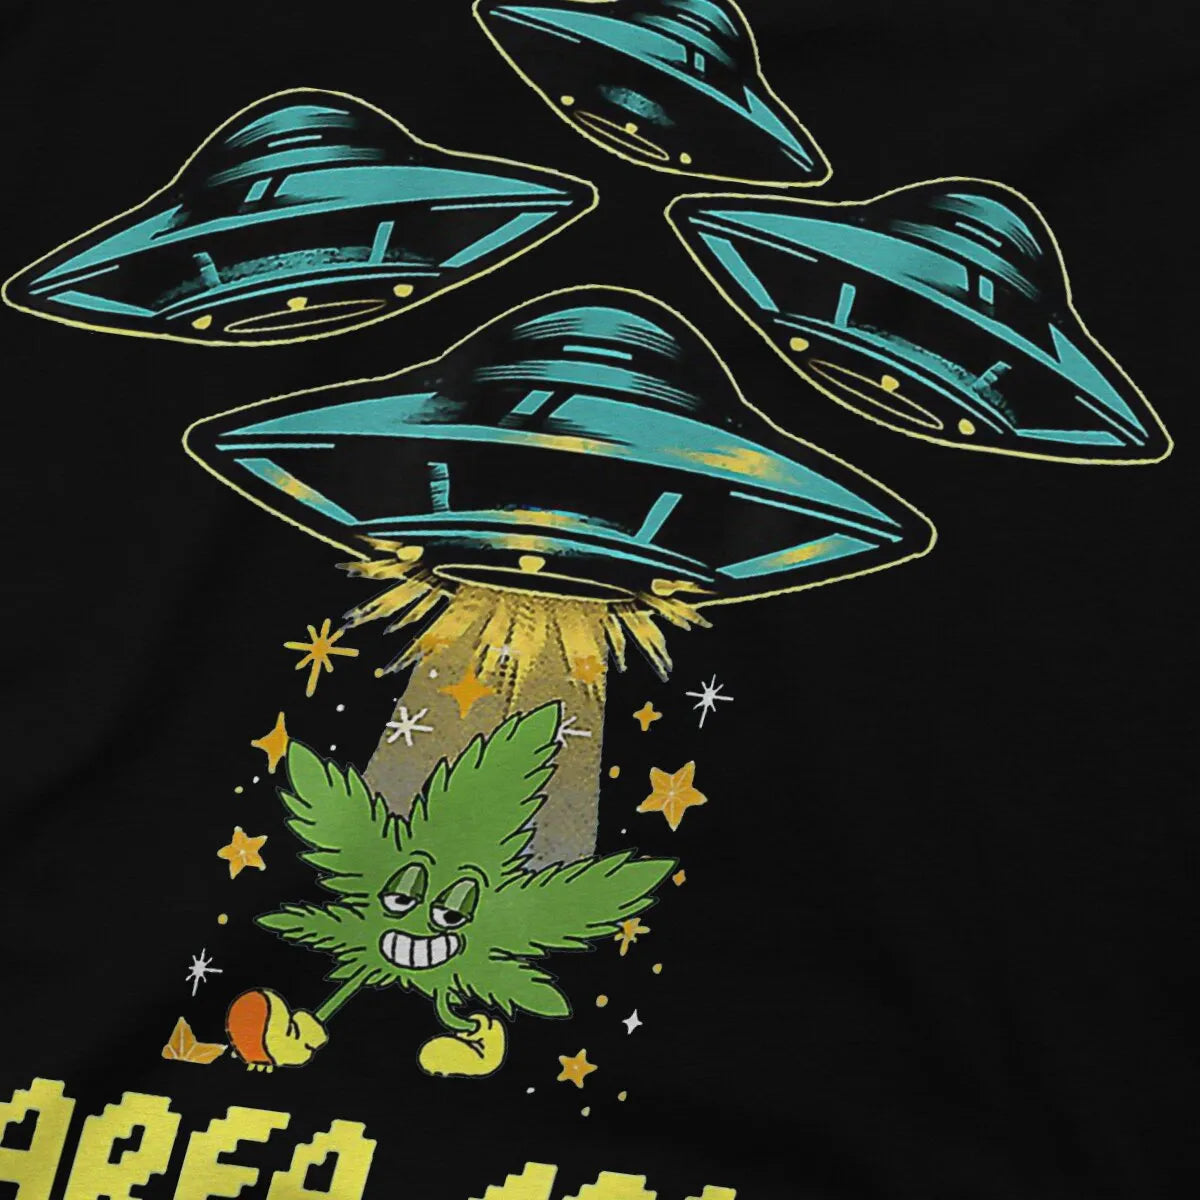 Aliens came for Weed Tee